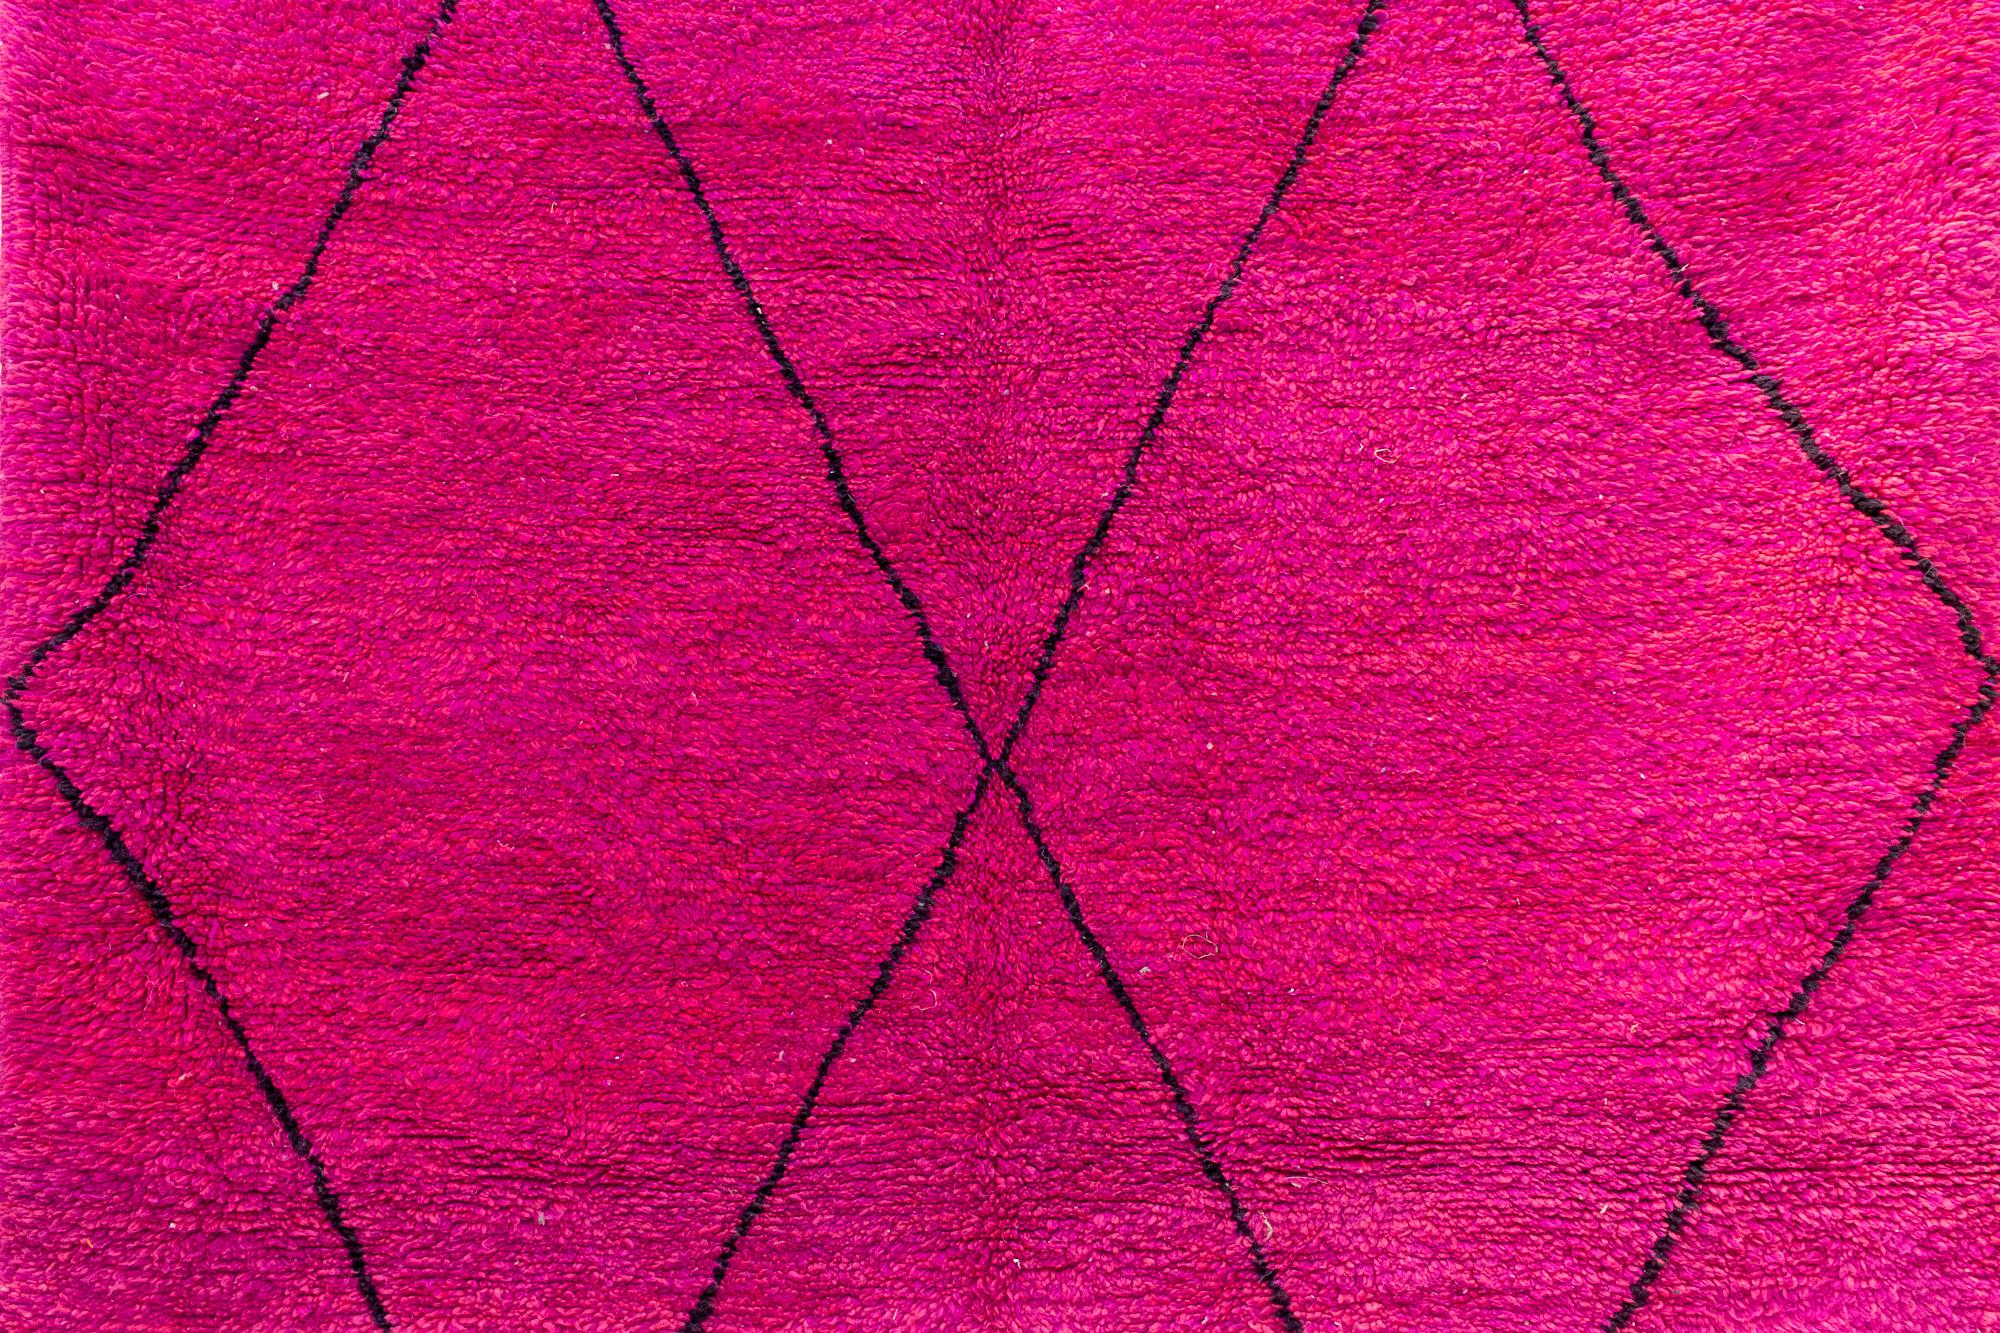 Tribal Moroccan Beni Ourain Double Sided Wool Rug in Hot Pink and Black